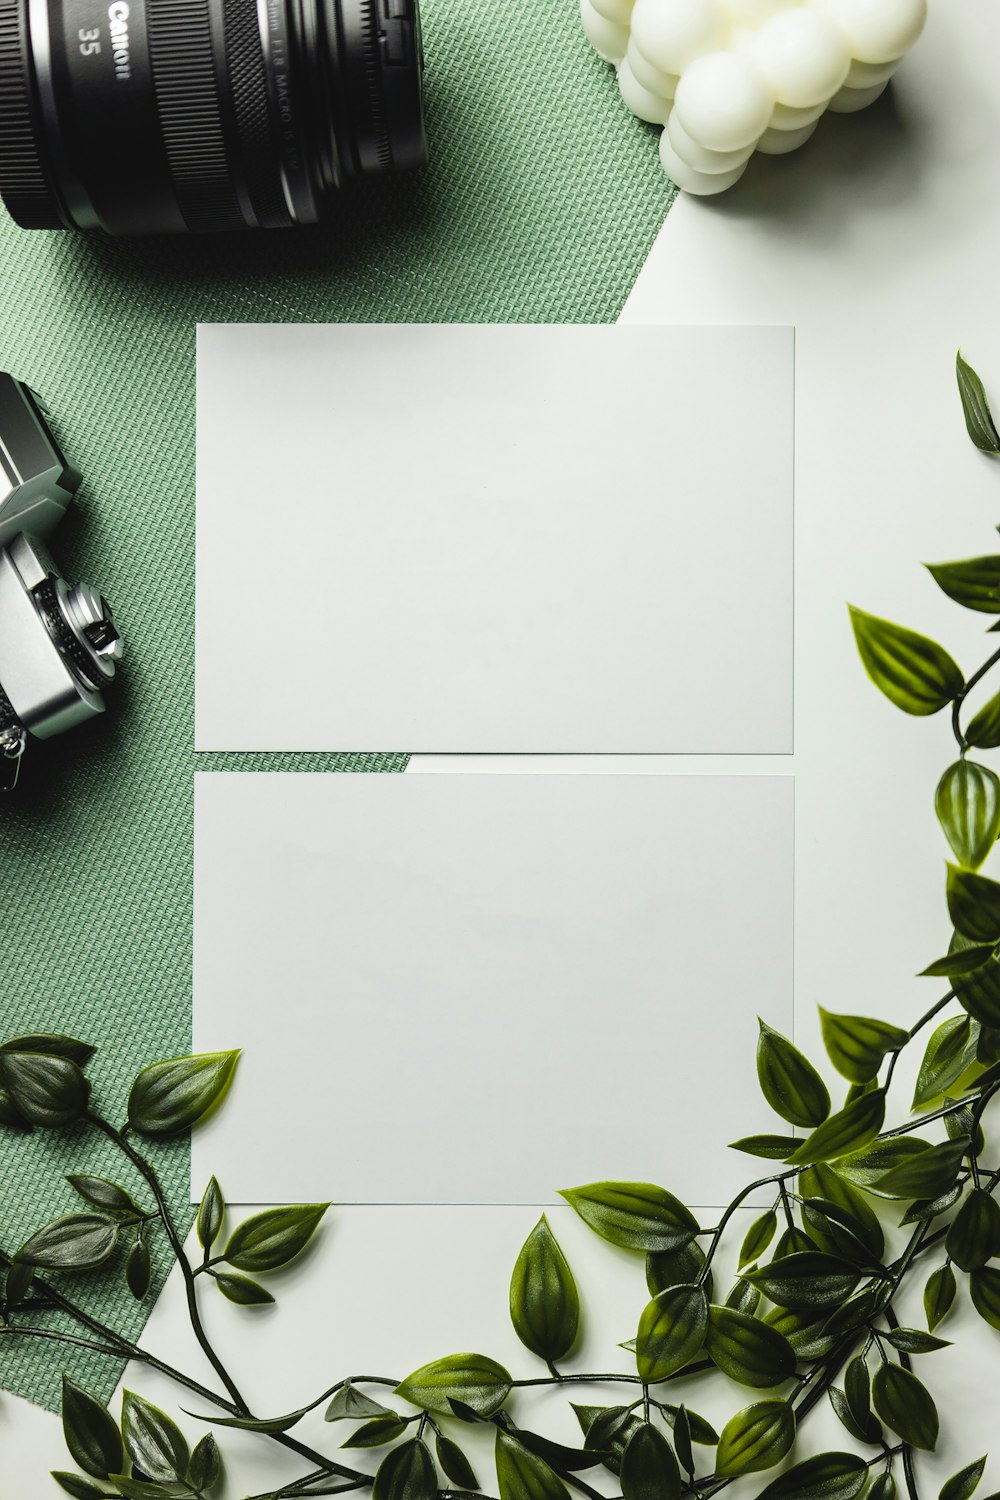 a white piece of paper on a green surface